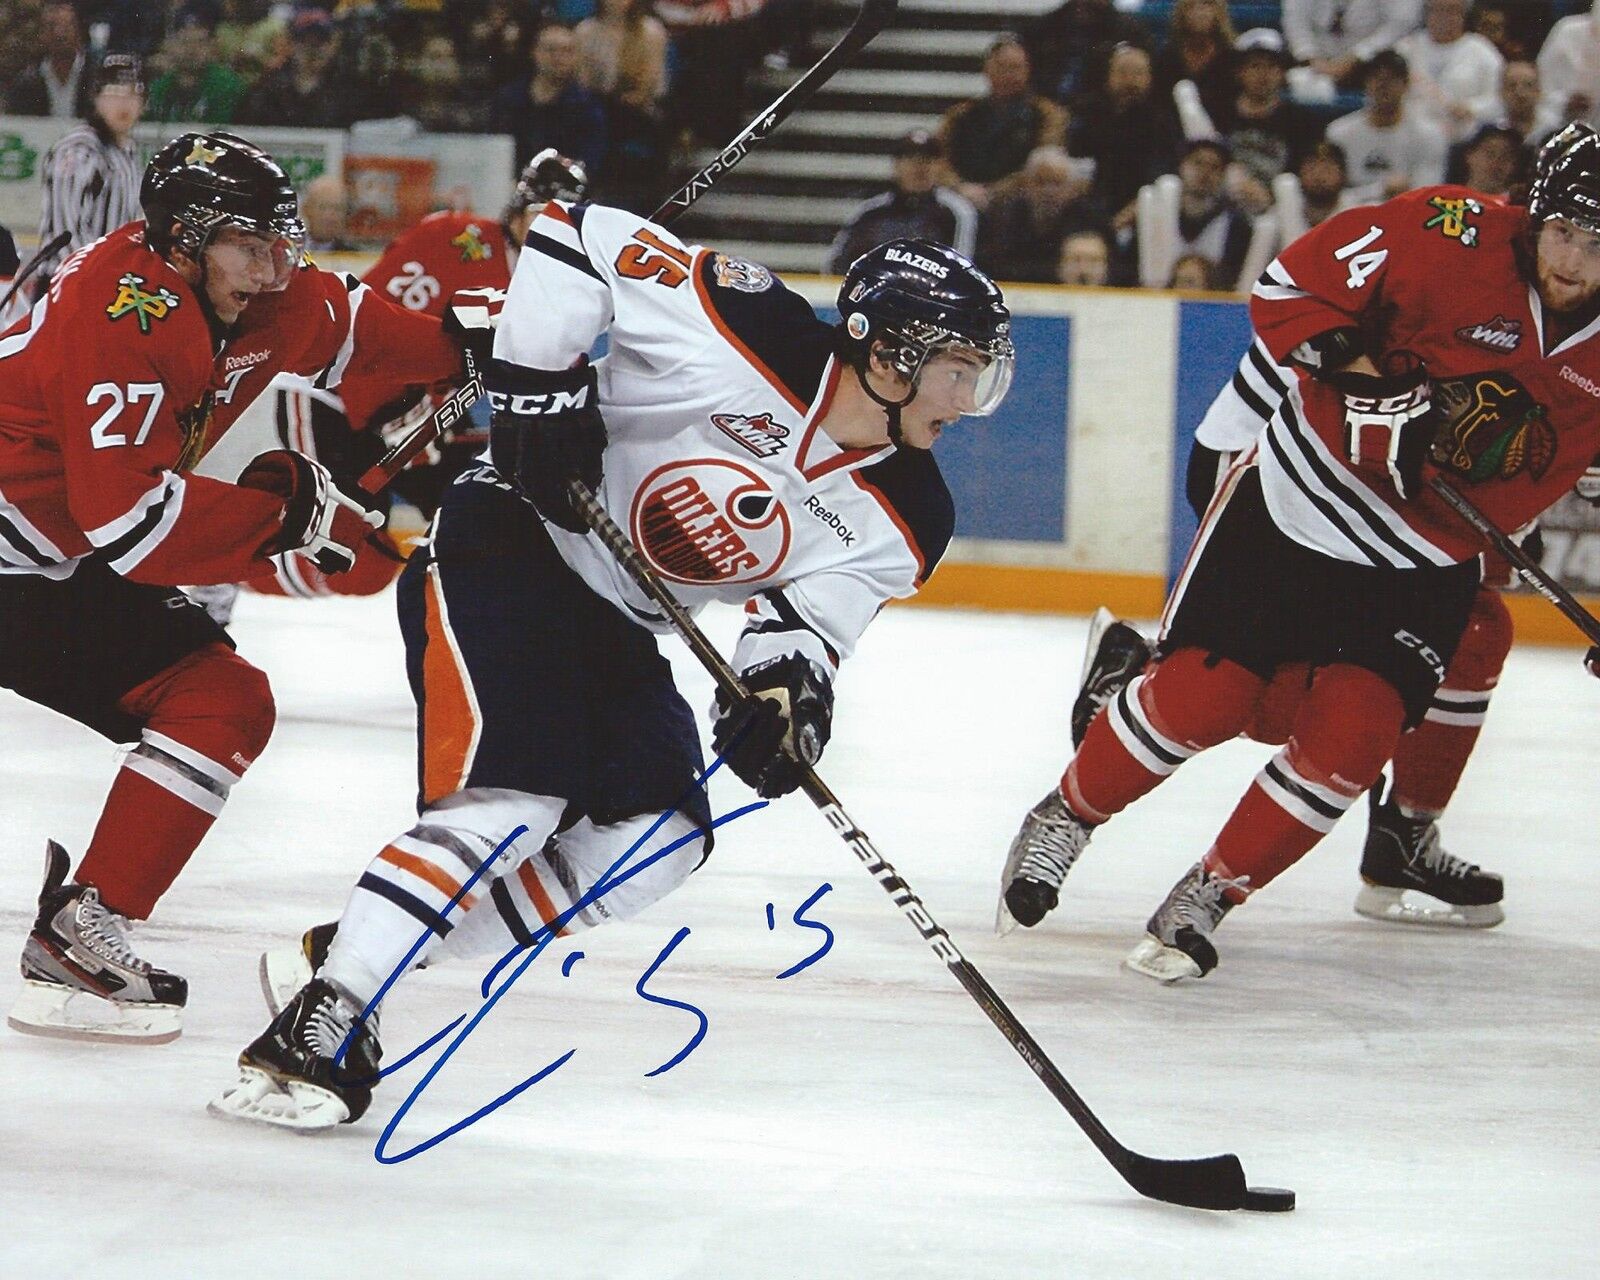 Tim Bozon Signed 8x10 Photo Poster painting Kamloops Blazers Autographed COA